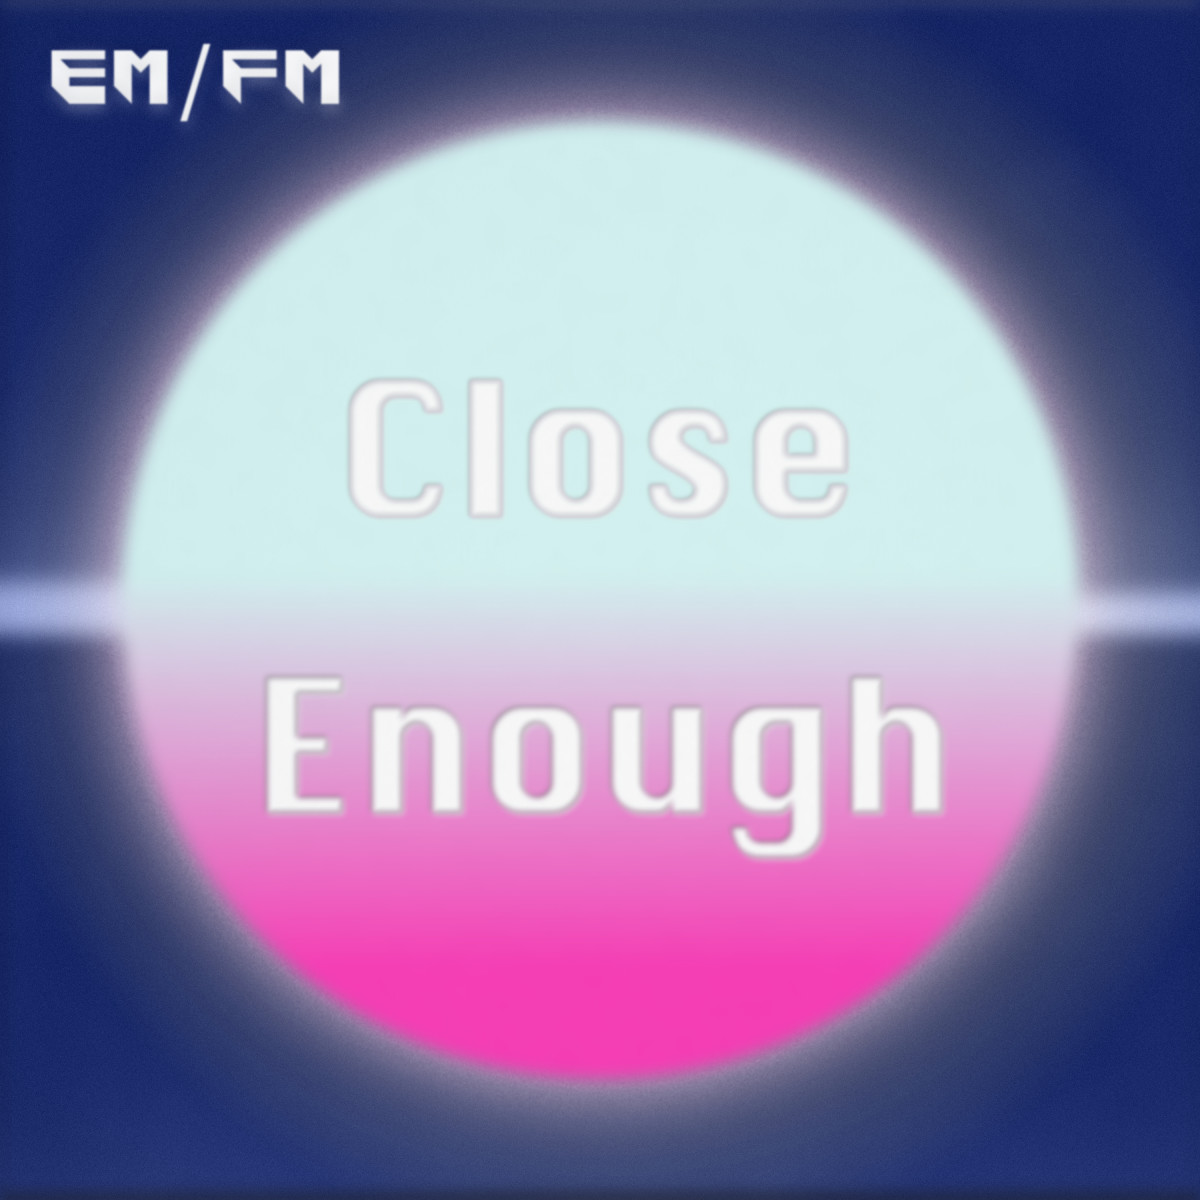 synth-single-review-close-enough-by-emfm